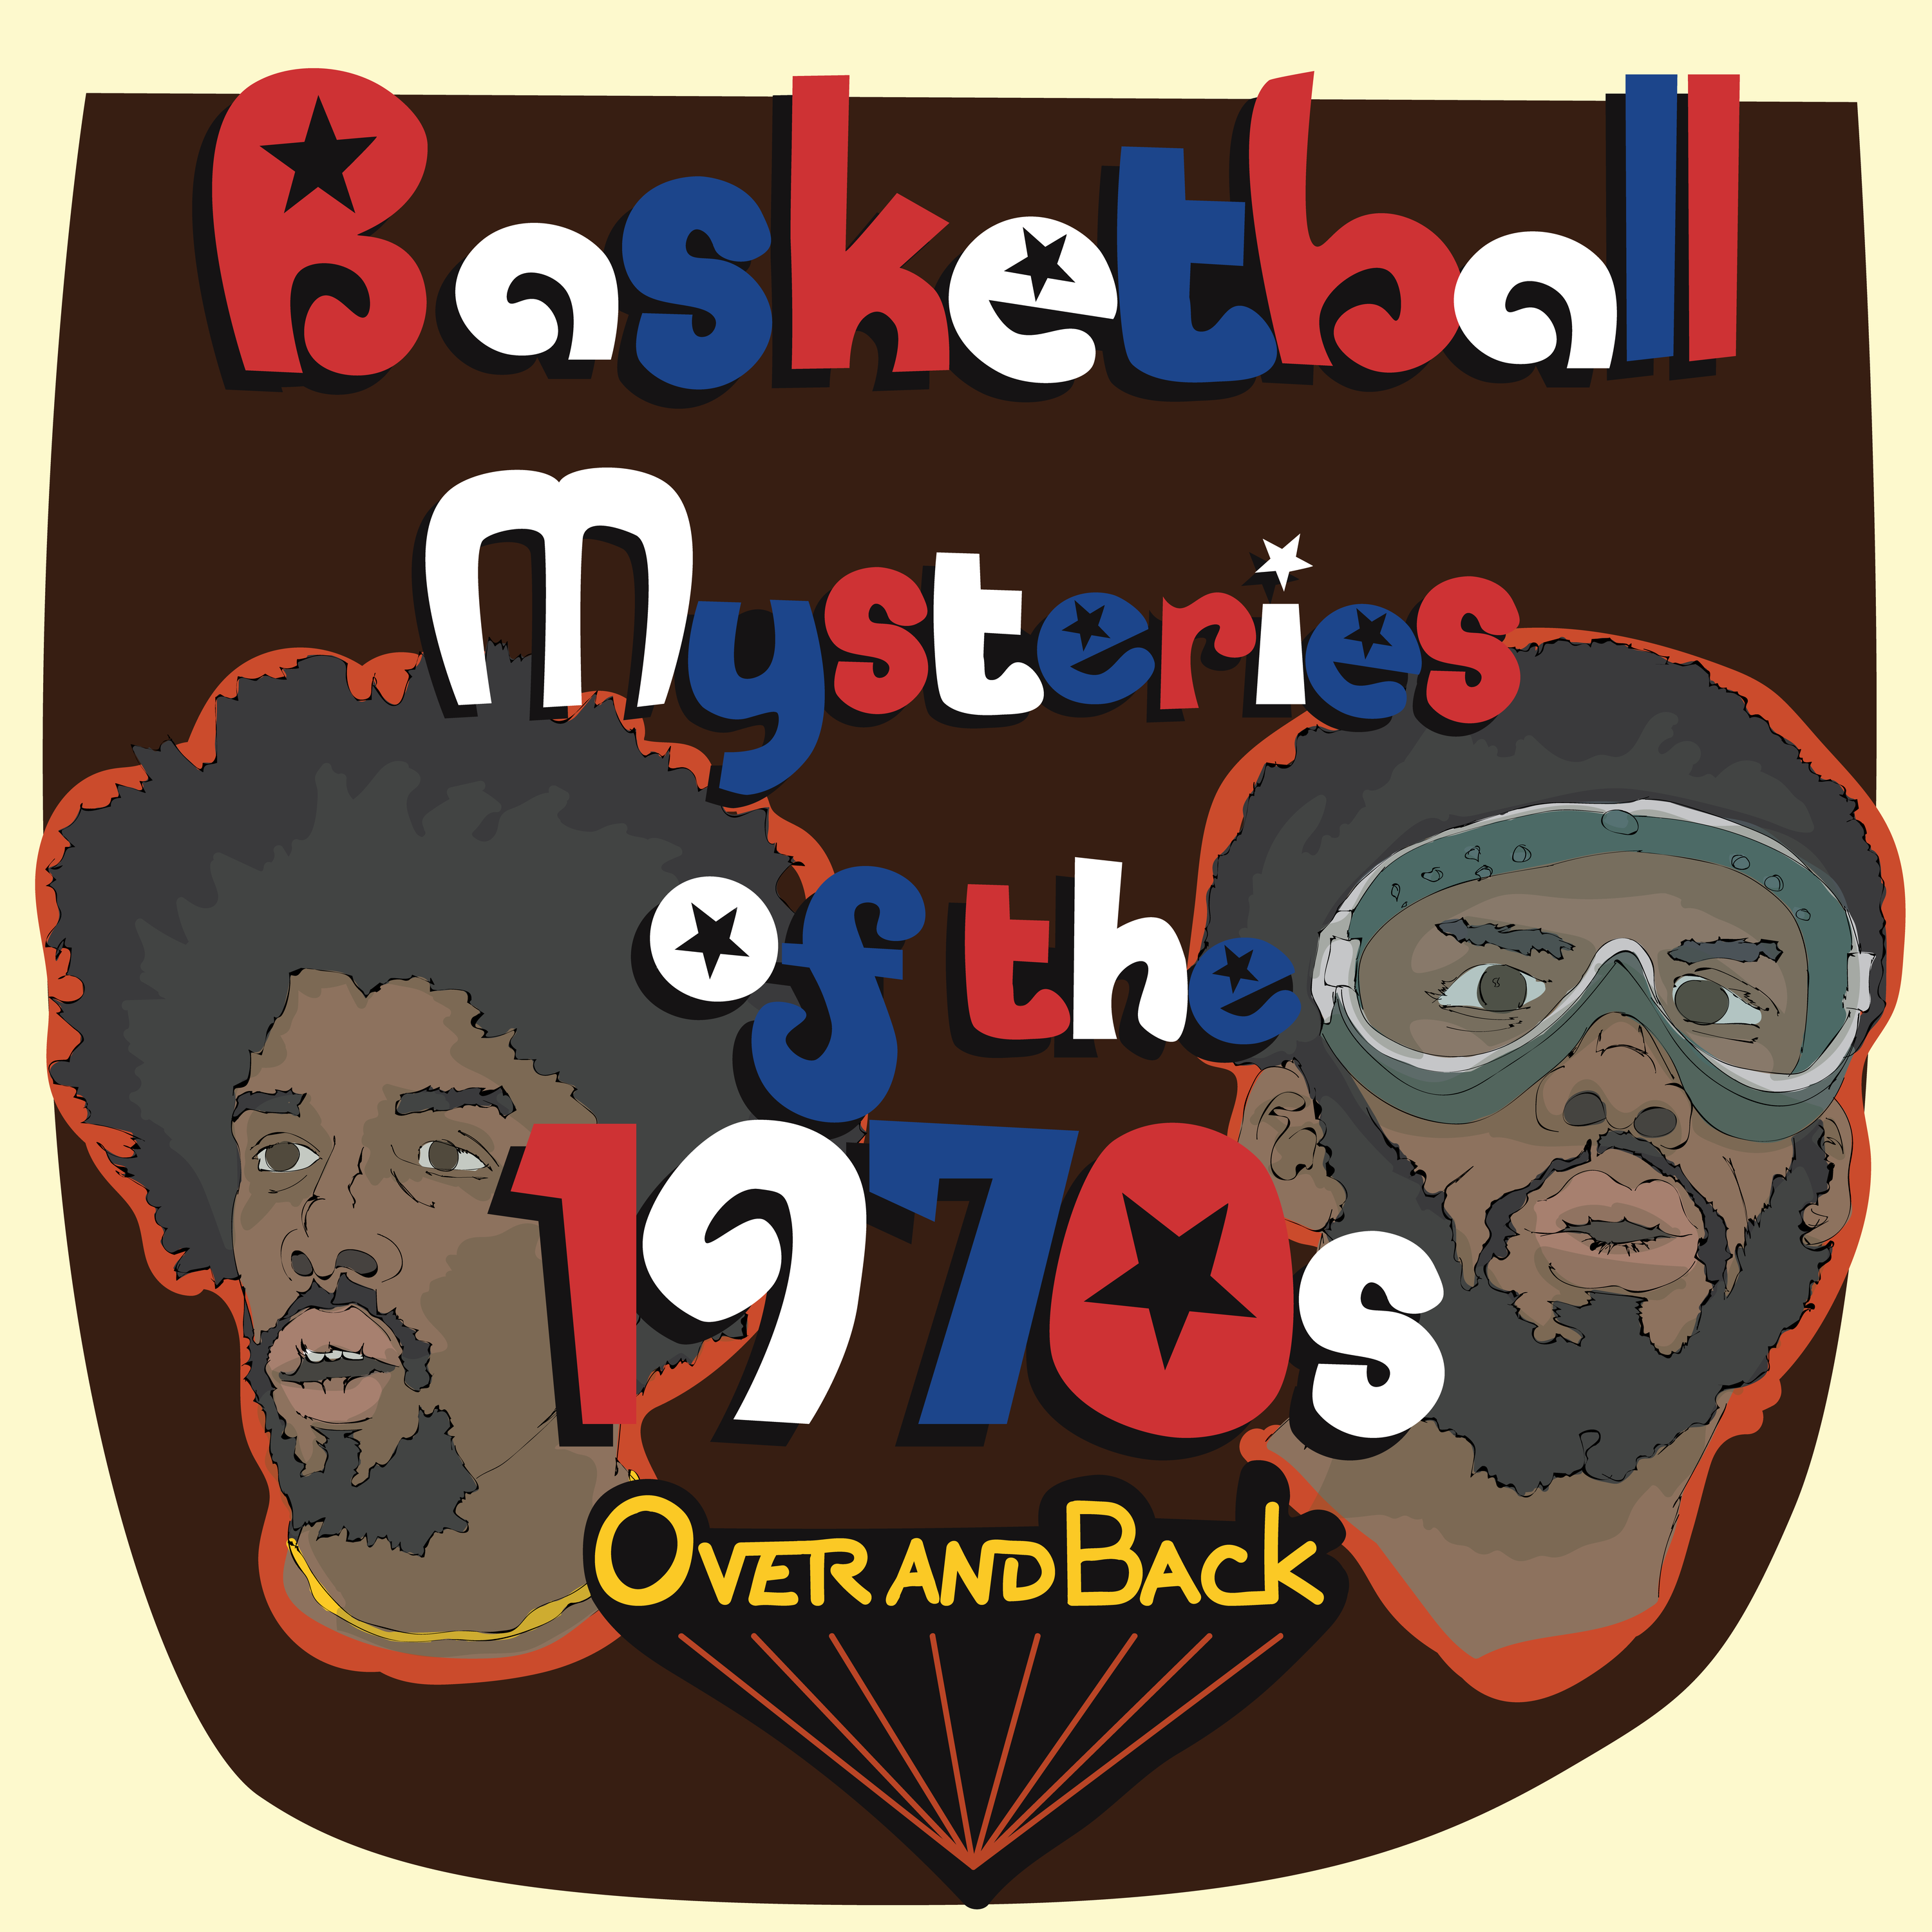 Who were the pioneers of women's pro basketball? (Basketball Mysteries of the 1970s #40)